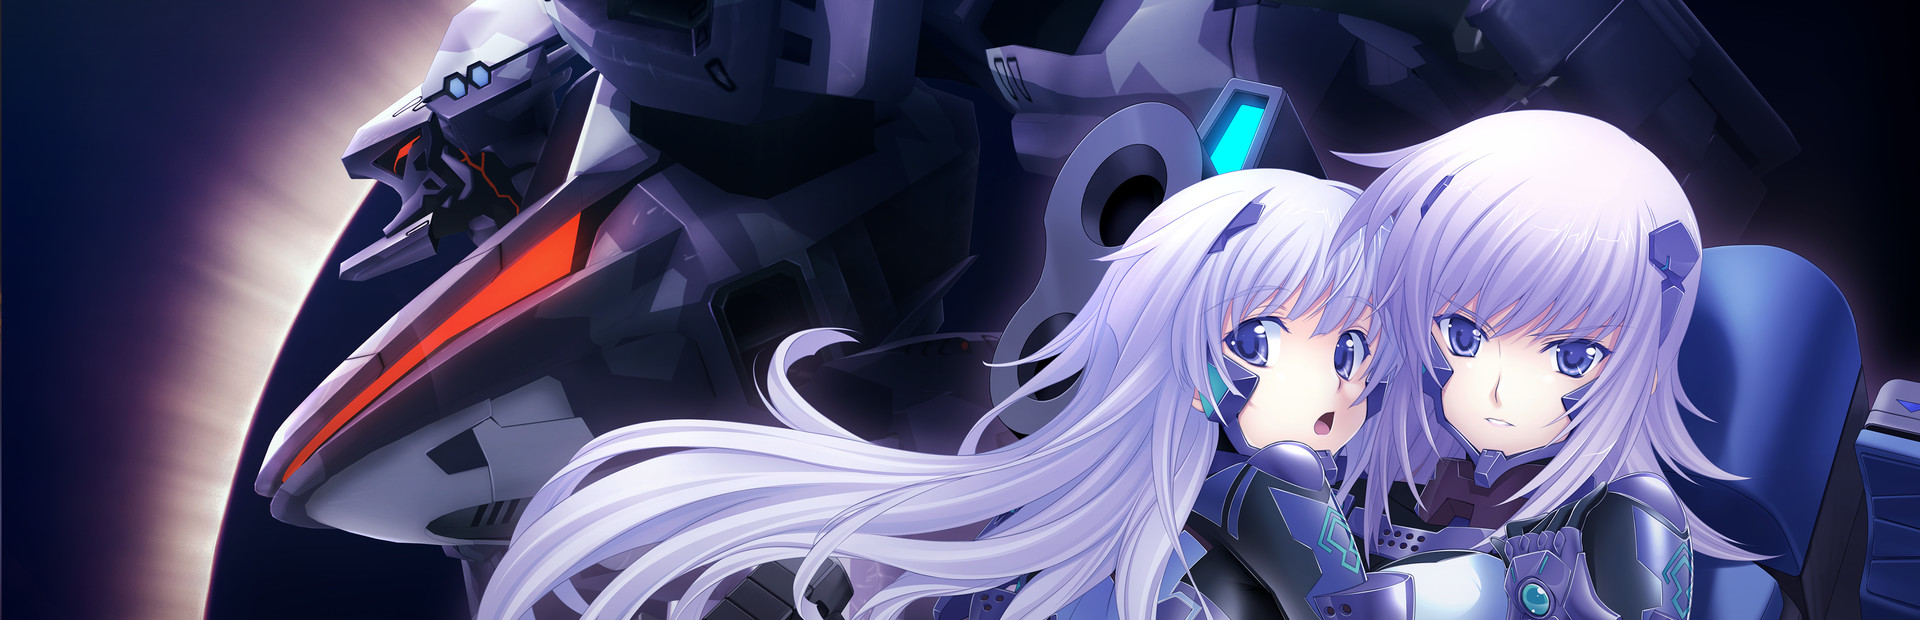 Muv-Luv Alternative Total Eclipse Remastered cover image